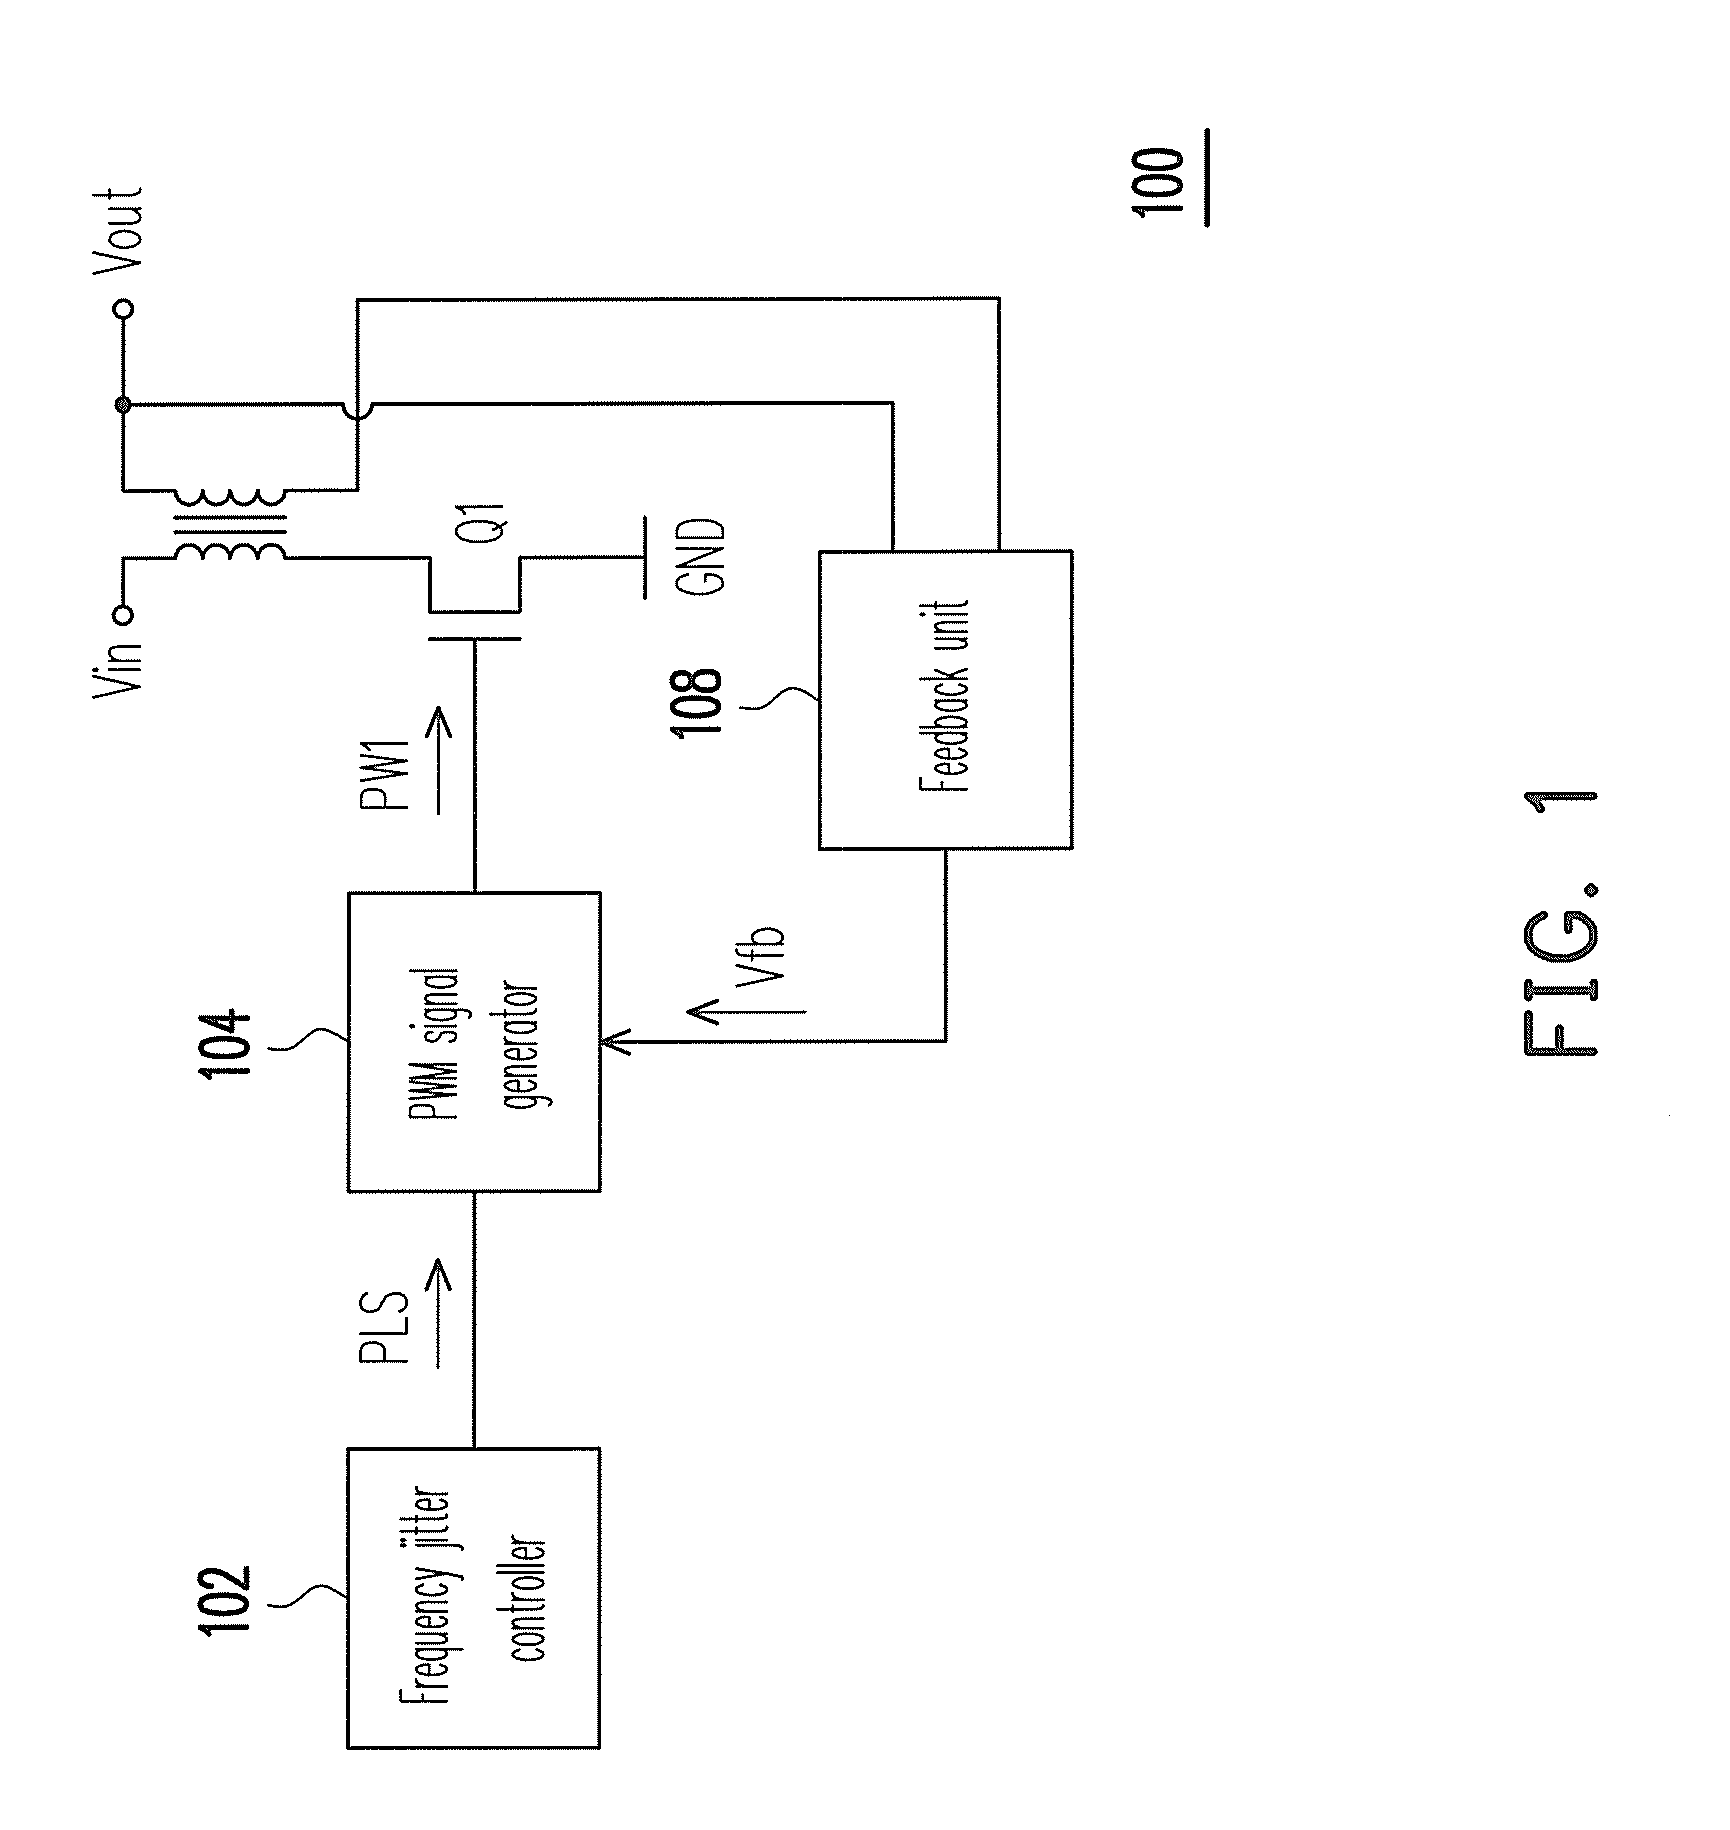 Frequency jitter controller for power converter